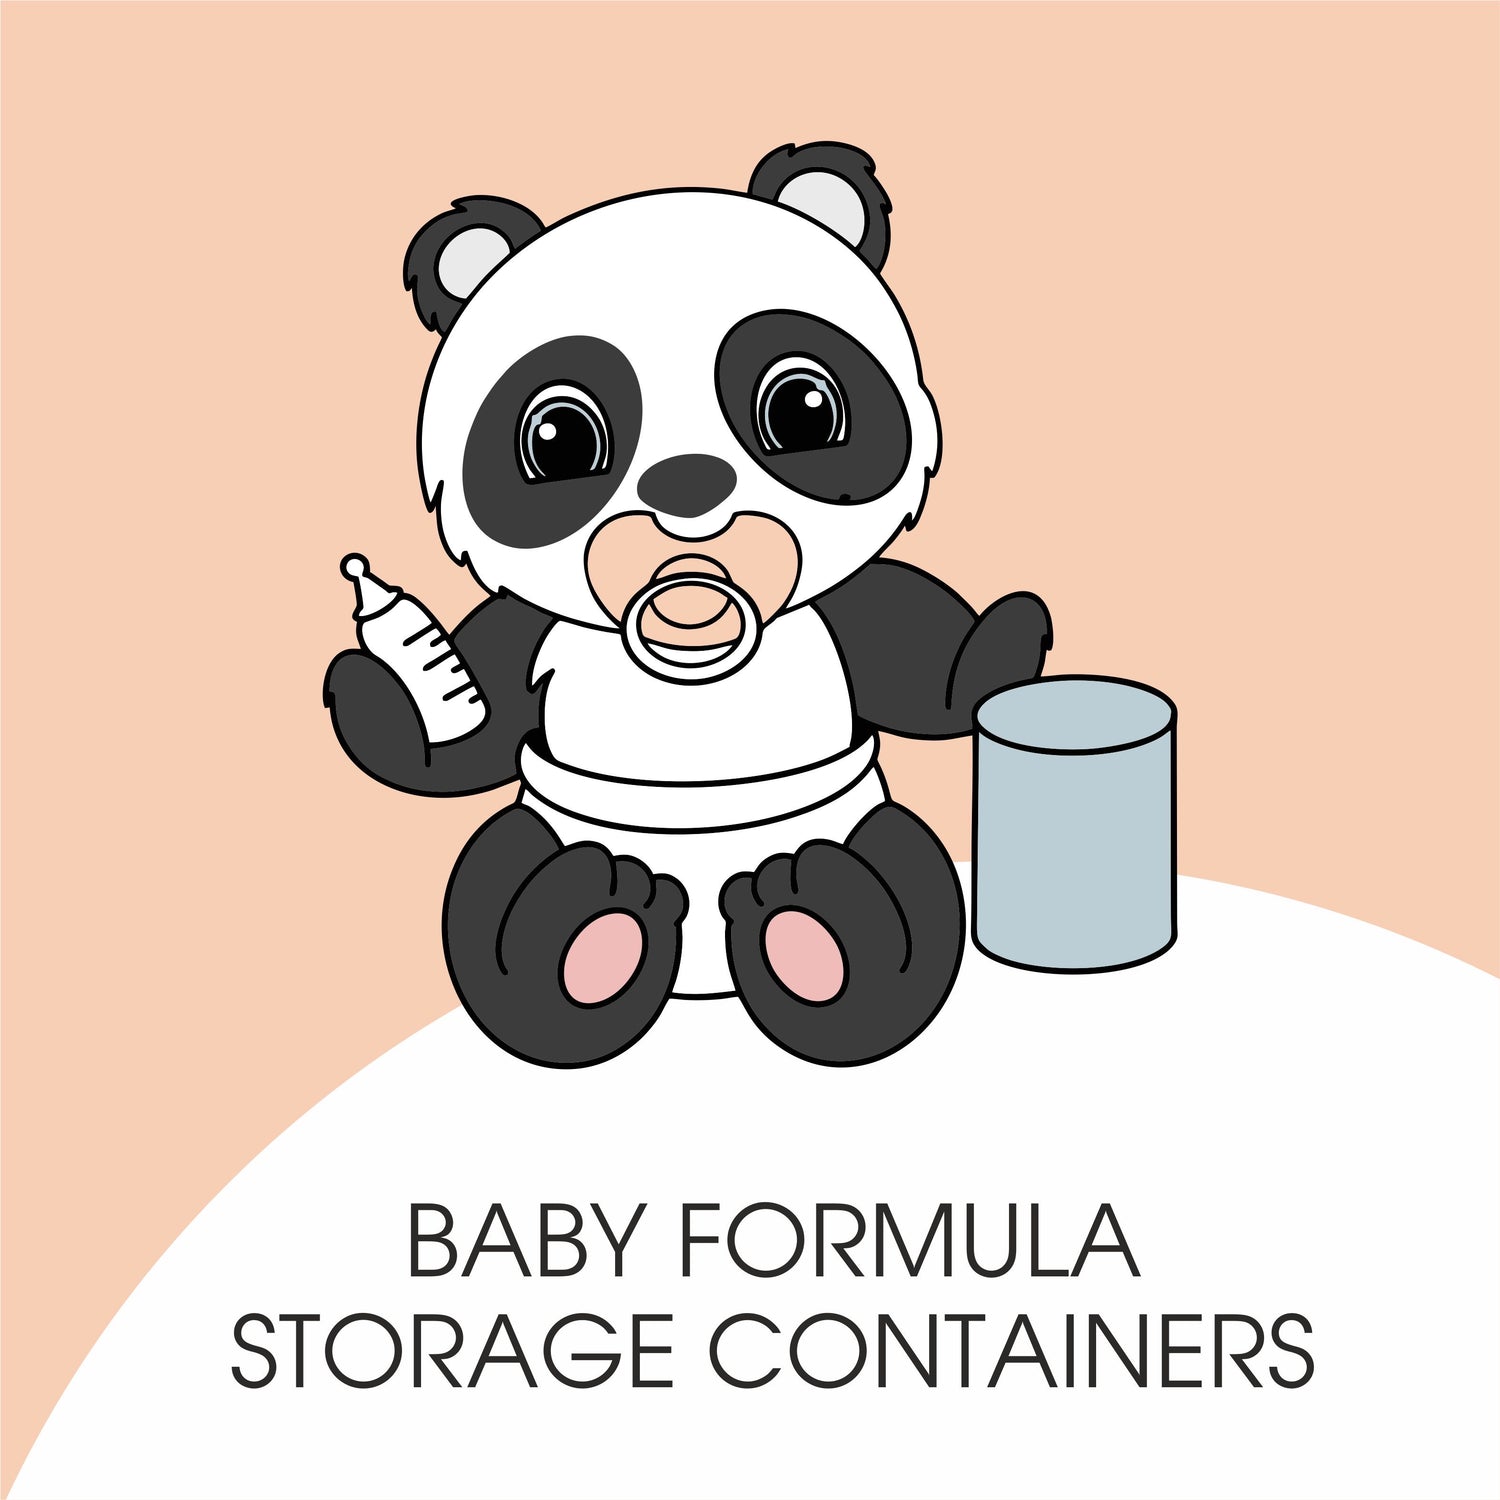 BAYBY FORMULA STORAGE CONTAINERS